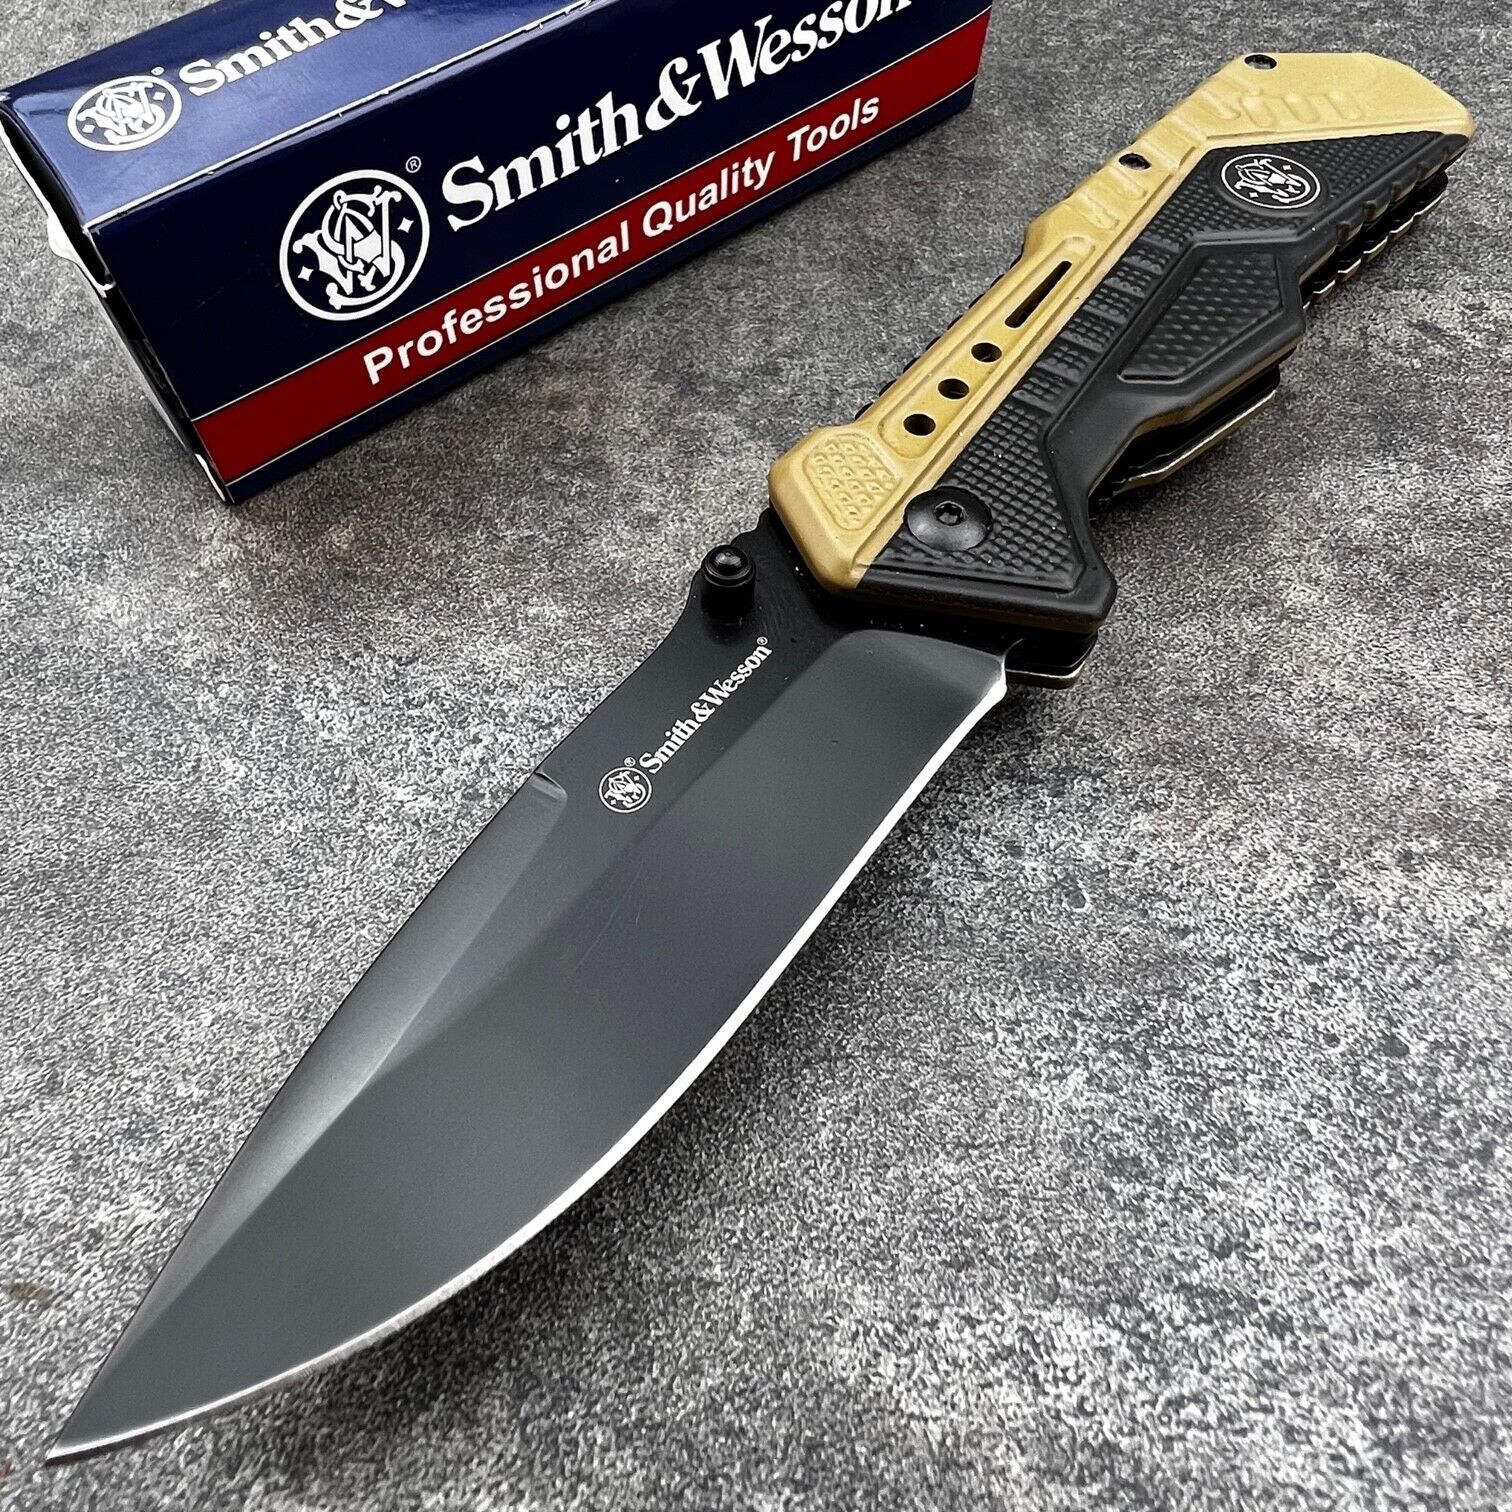 Smith & Wesson Black and Tan Assisted Open Rubberized EDC Folding Pocket Knife